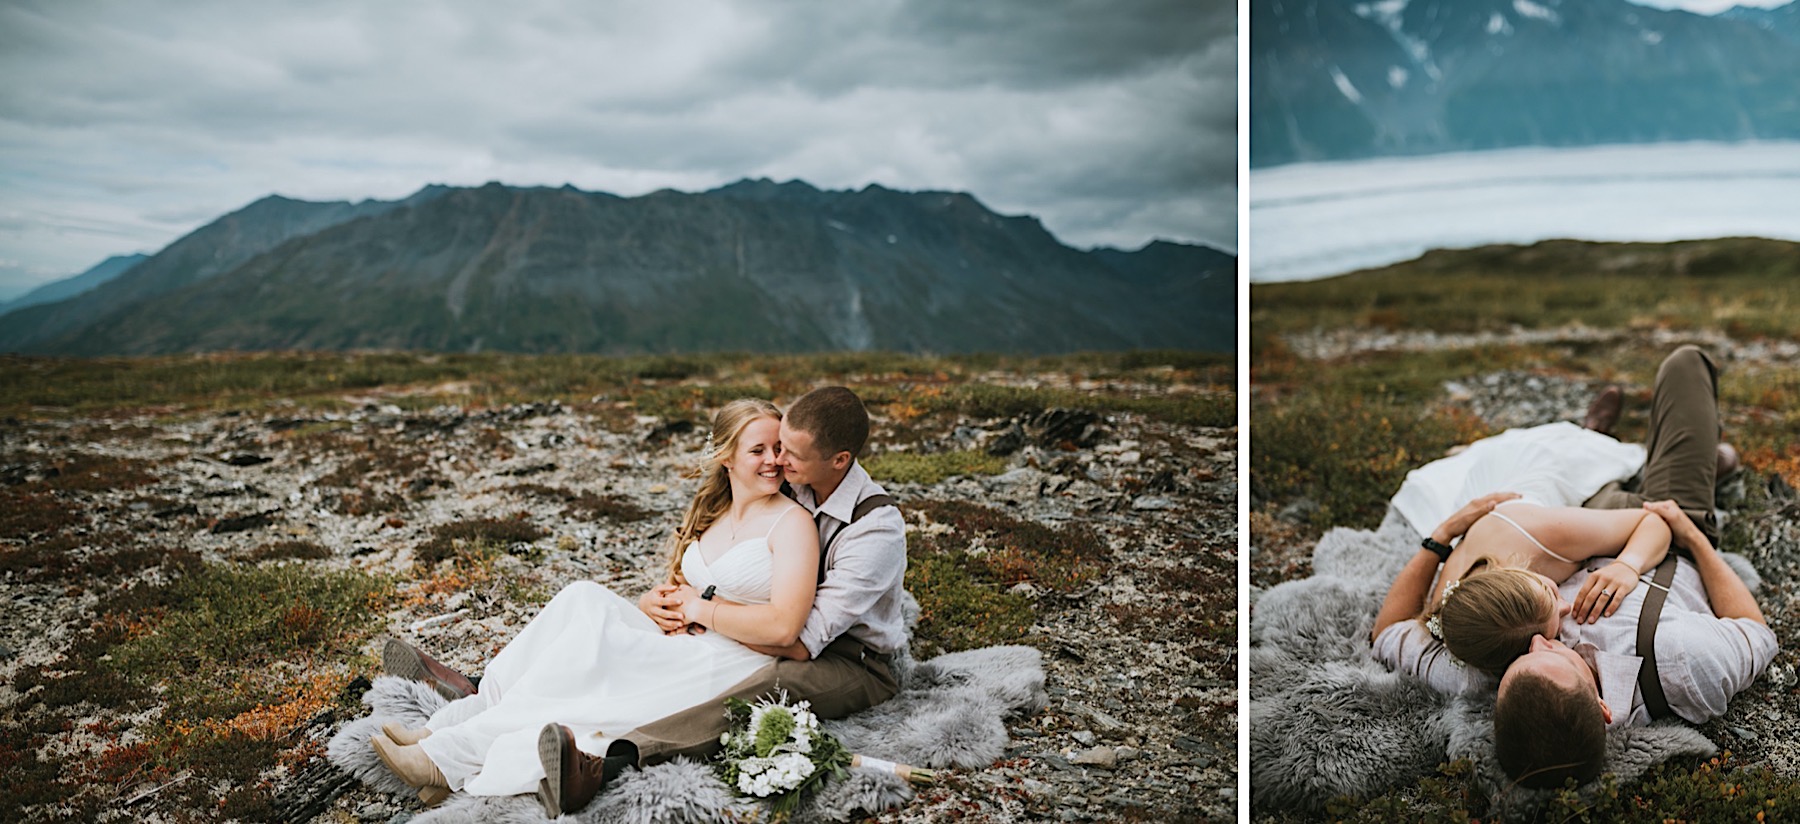 Bride and groom laying down and sitting on mountainside during alaska destination wedding